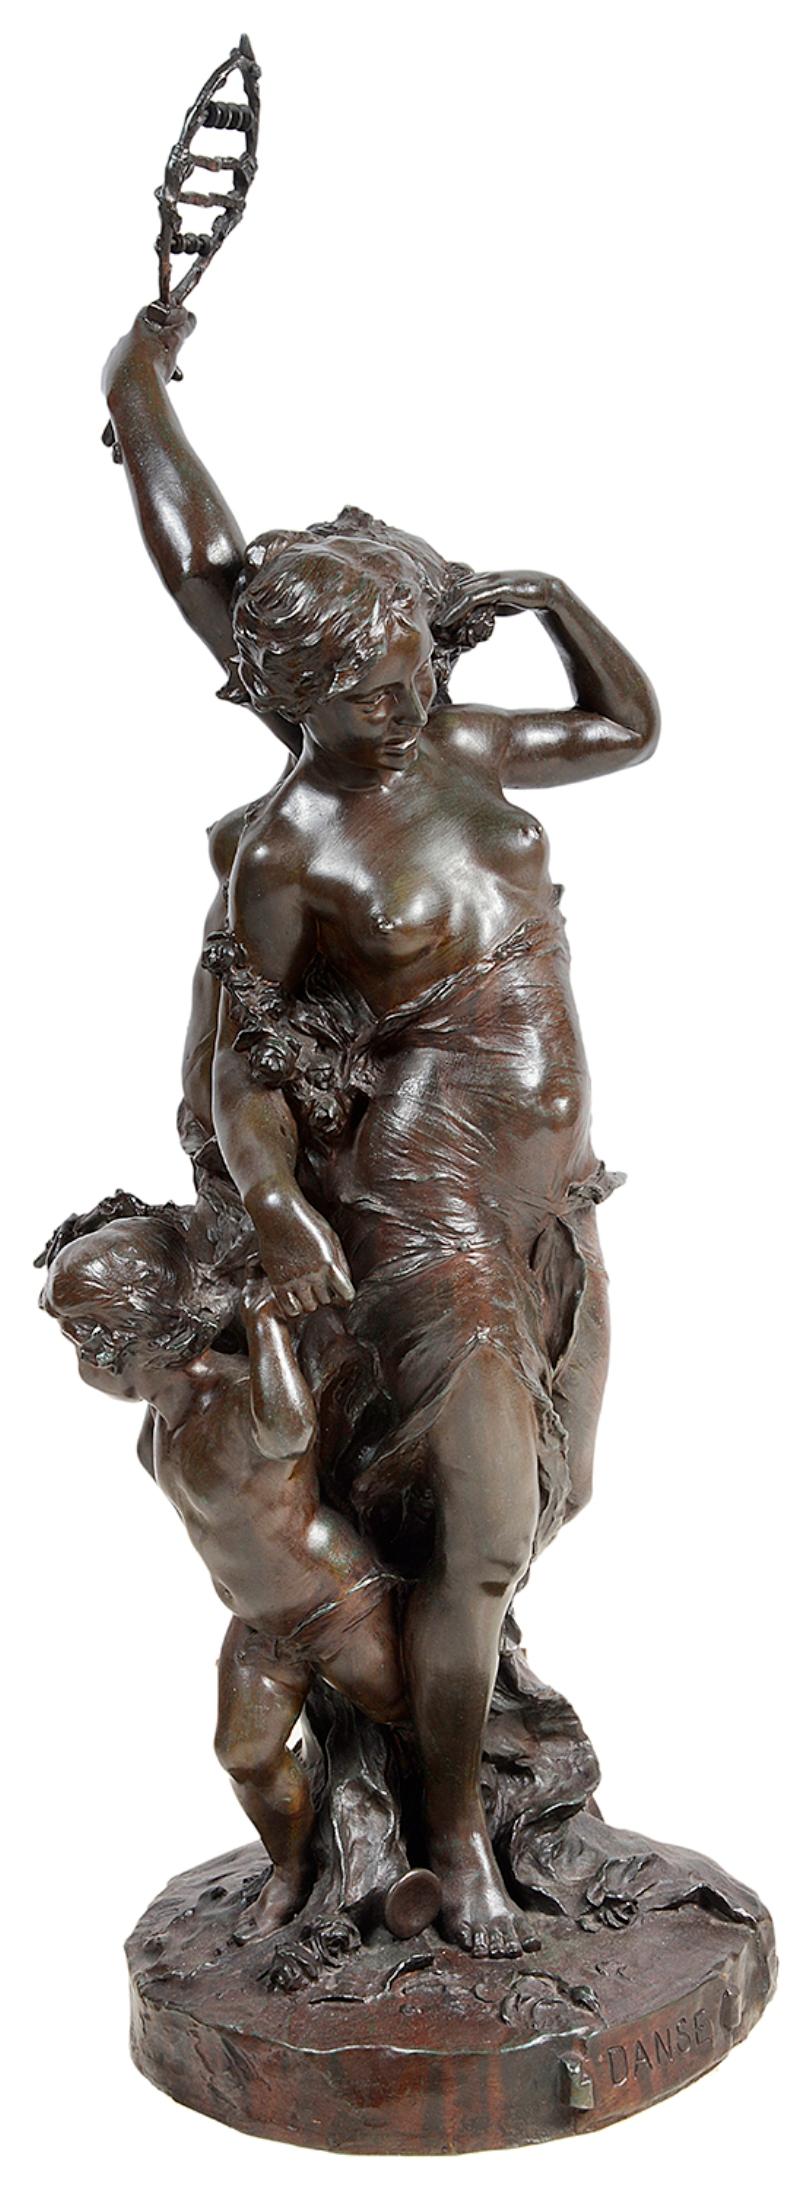 A very impressive 19th century bronze study of two semi nude classical females with child, entitled 'Music and Dance'
Signed; JB. Germain
Jean-Baptiste Germain (French, 1841-1910).